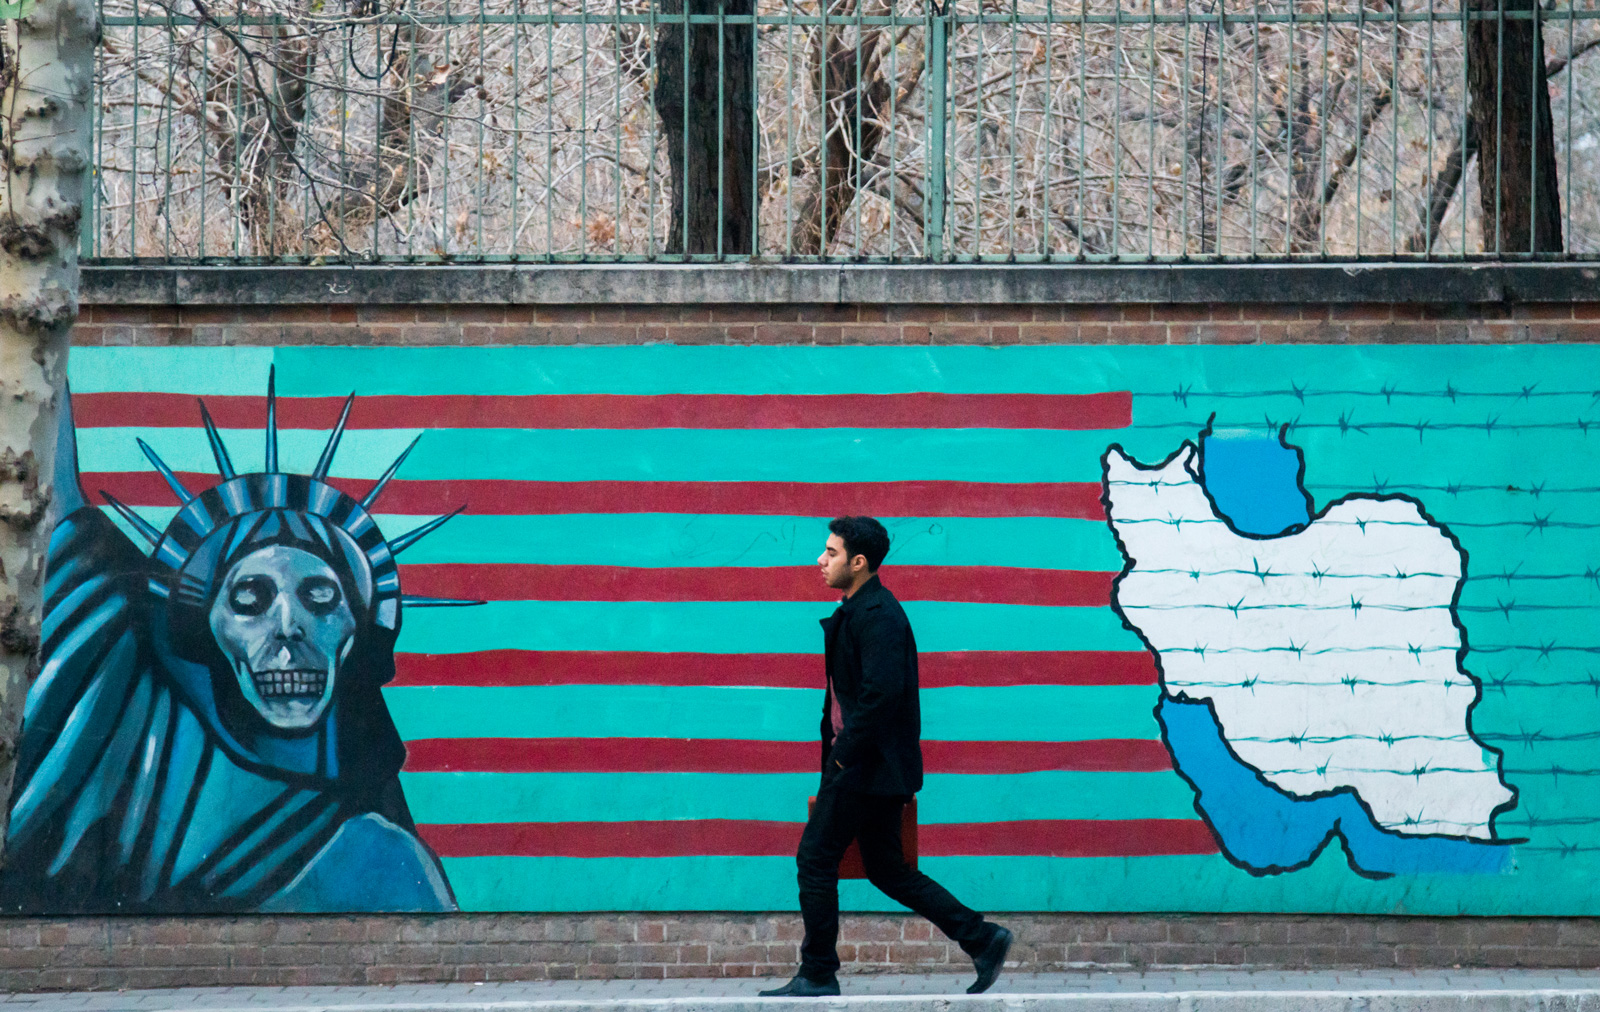 A mural on the wall of the former US embassy, Tehran, 2015